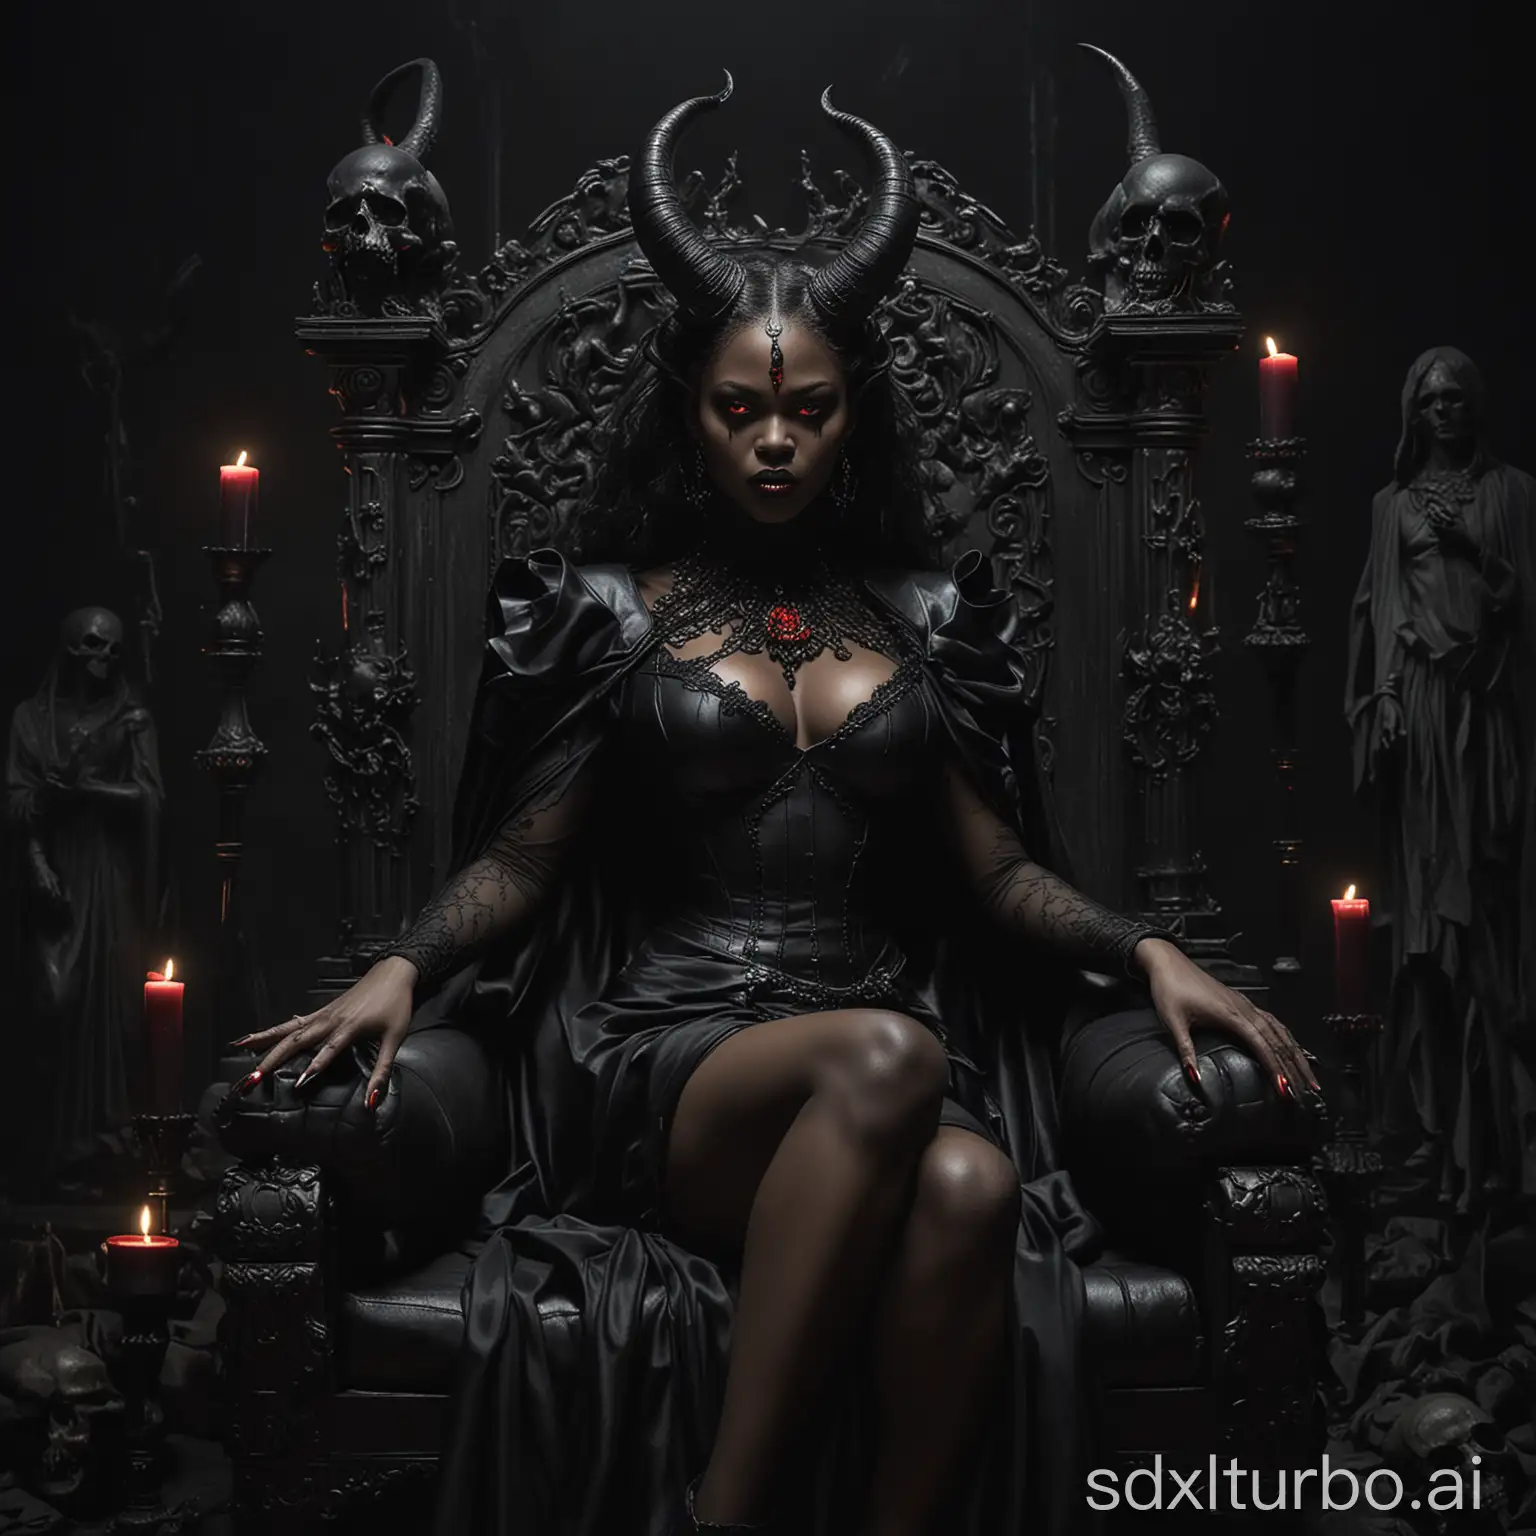 a majestic and powerful black woman demon red eyes black makeup, big breasts, exuding an aura of authority. Her imposing presence is accentuated by her mesmerizing horns, sitting majestically on a black throne, whose intricately detailed seat adds to the air of mystique. Her dark costume and black cape with a high collar further accentuate her imposing presence, she wears high heels. The enchanting atmosphere is deepened by two skulls on either side, each with a lit black candle that casts mysterious shadows. This captivating scene masterfully combines mystery, power